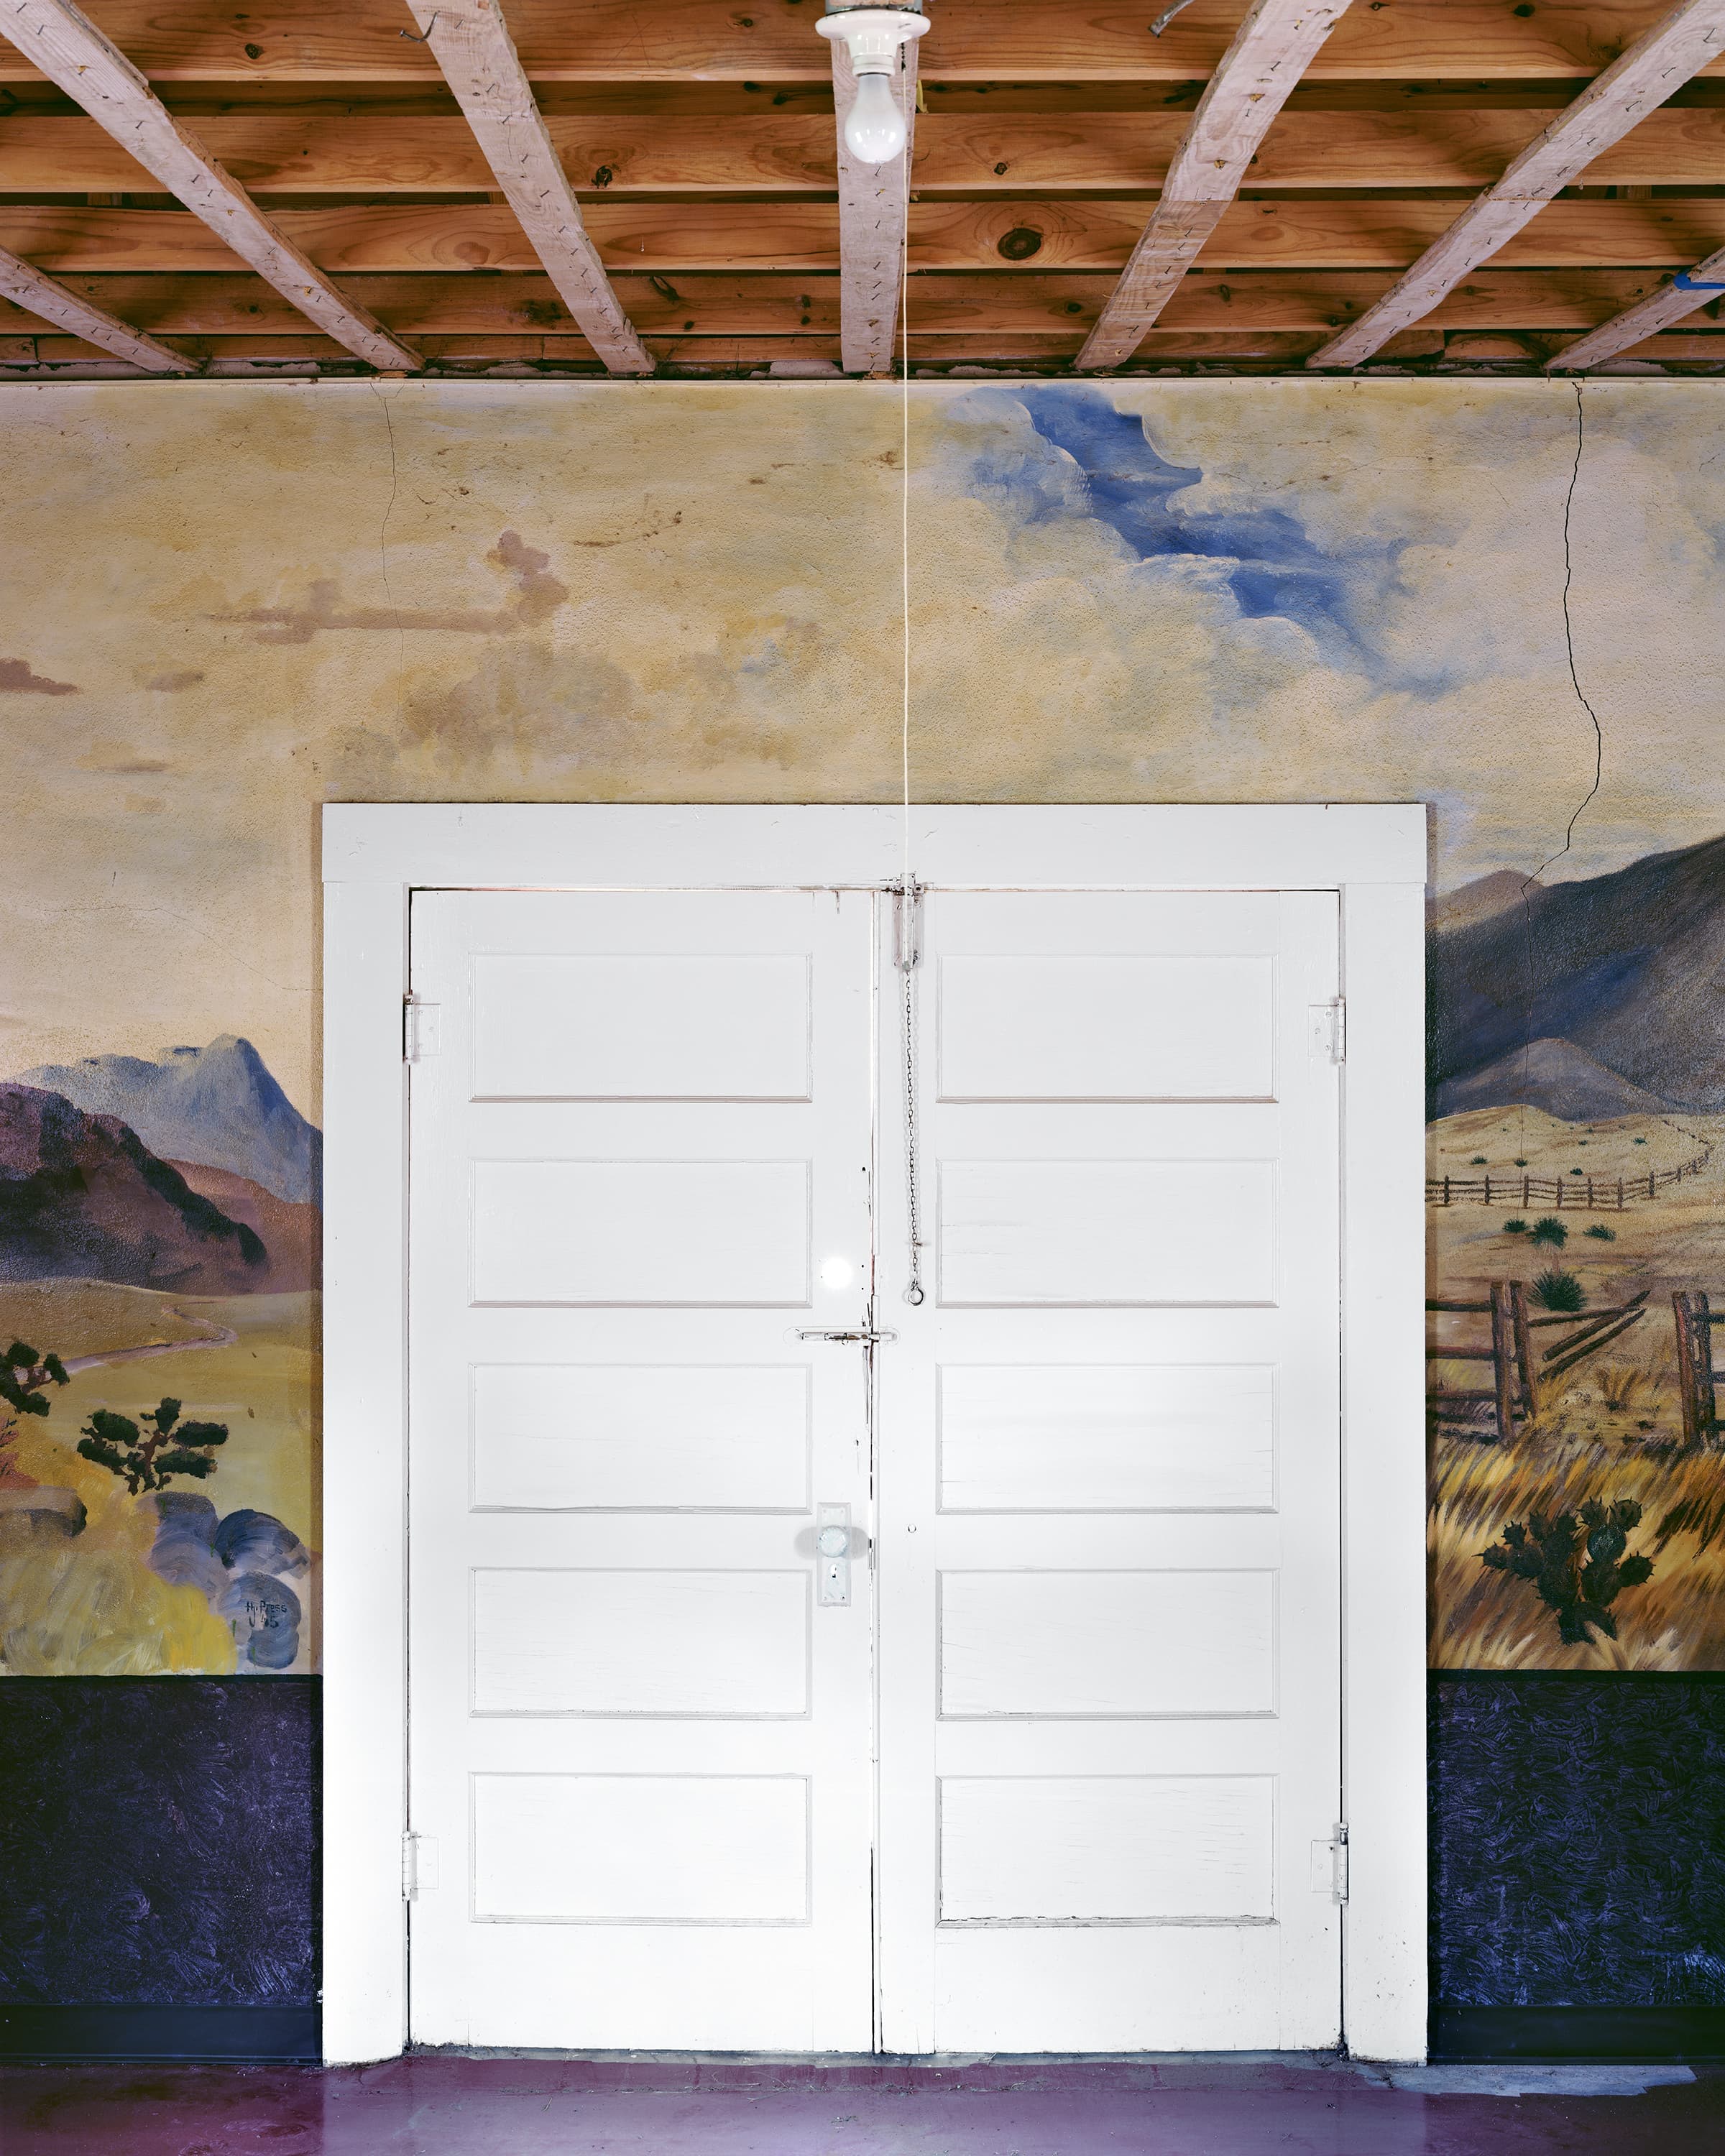 Landscape painted by German WWII prisoners-of-war painted on the interior of United States military barracks, surounding a door to the outside.